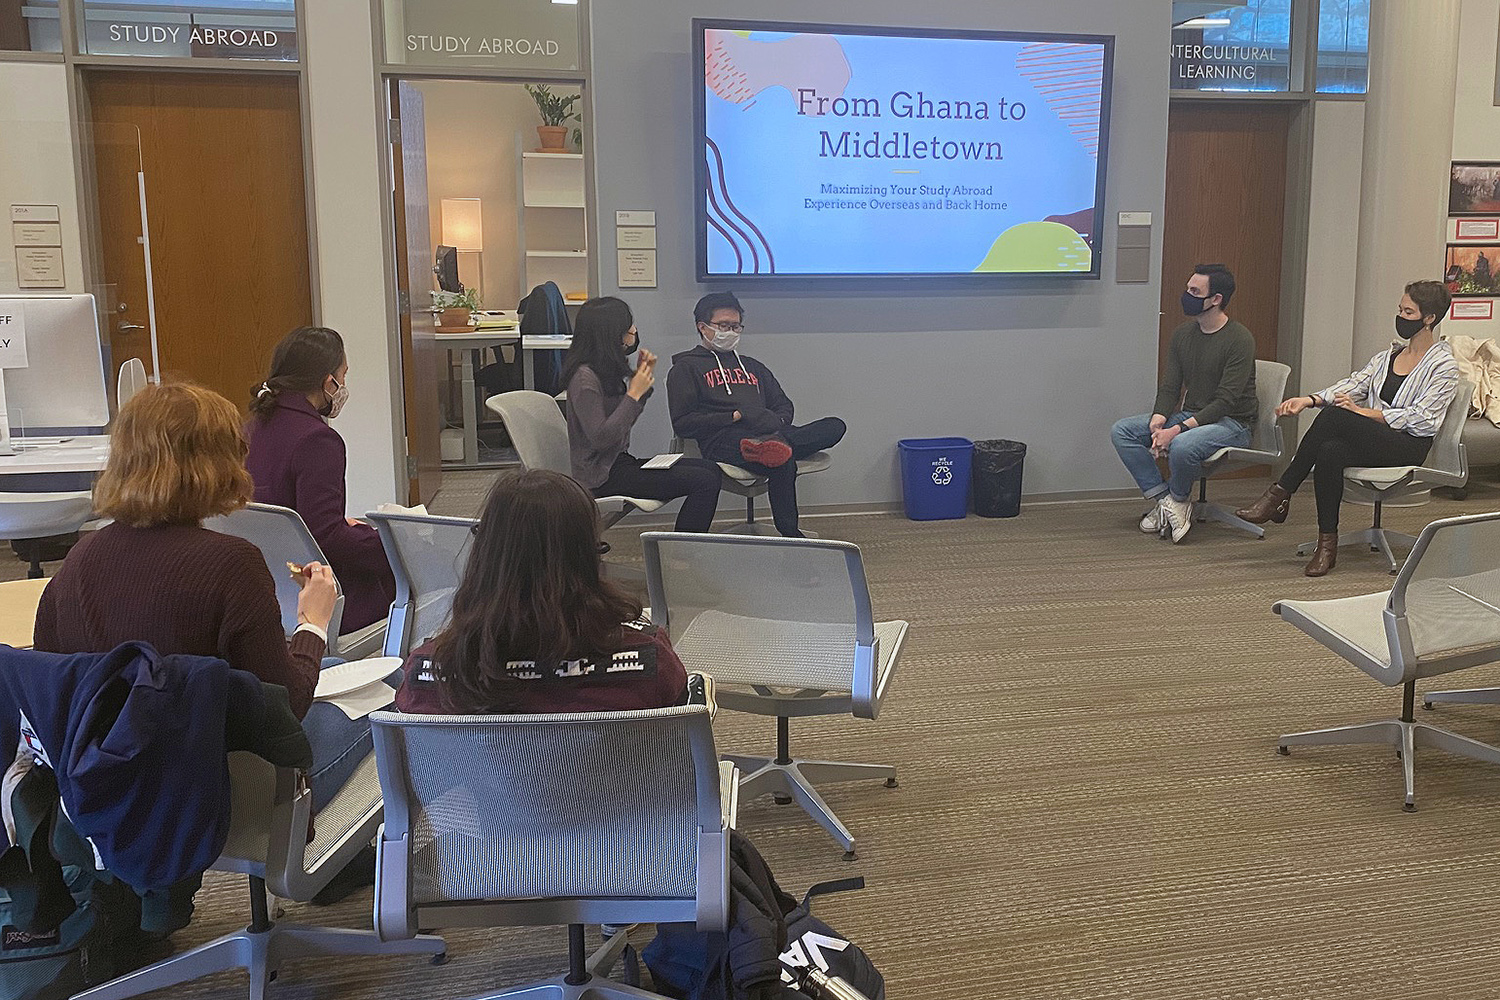 Several study abroad alumni led a discussion titled "From Ghana to Middletown: Maximizing Your Study Abroad Experience Overseas and Back Home." 